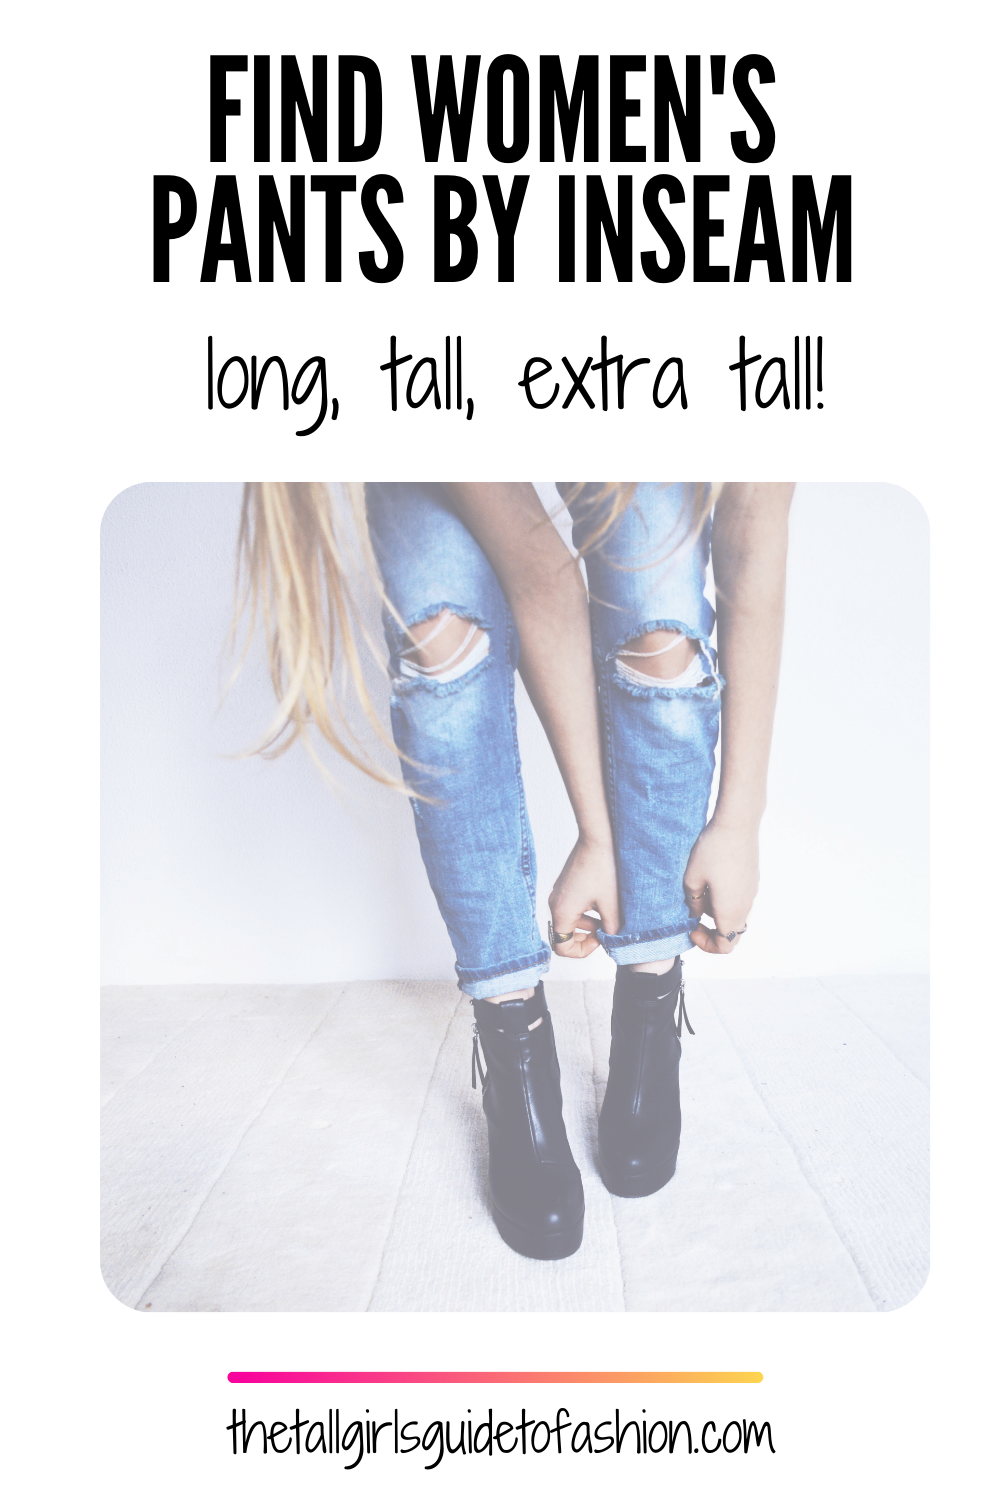 https://thetallgirlsguidetofashion.com/wp-content/uploads/2021/02/find-pants-by-inseam-long-tall-extra-tall.png